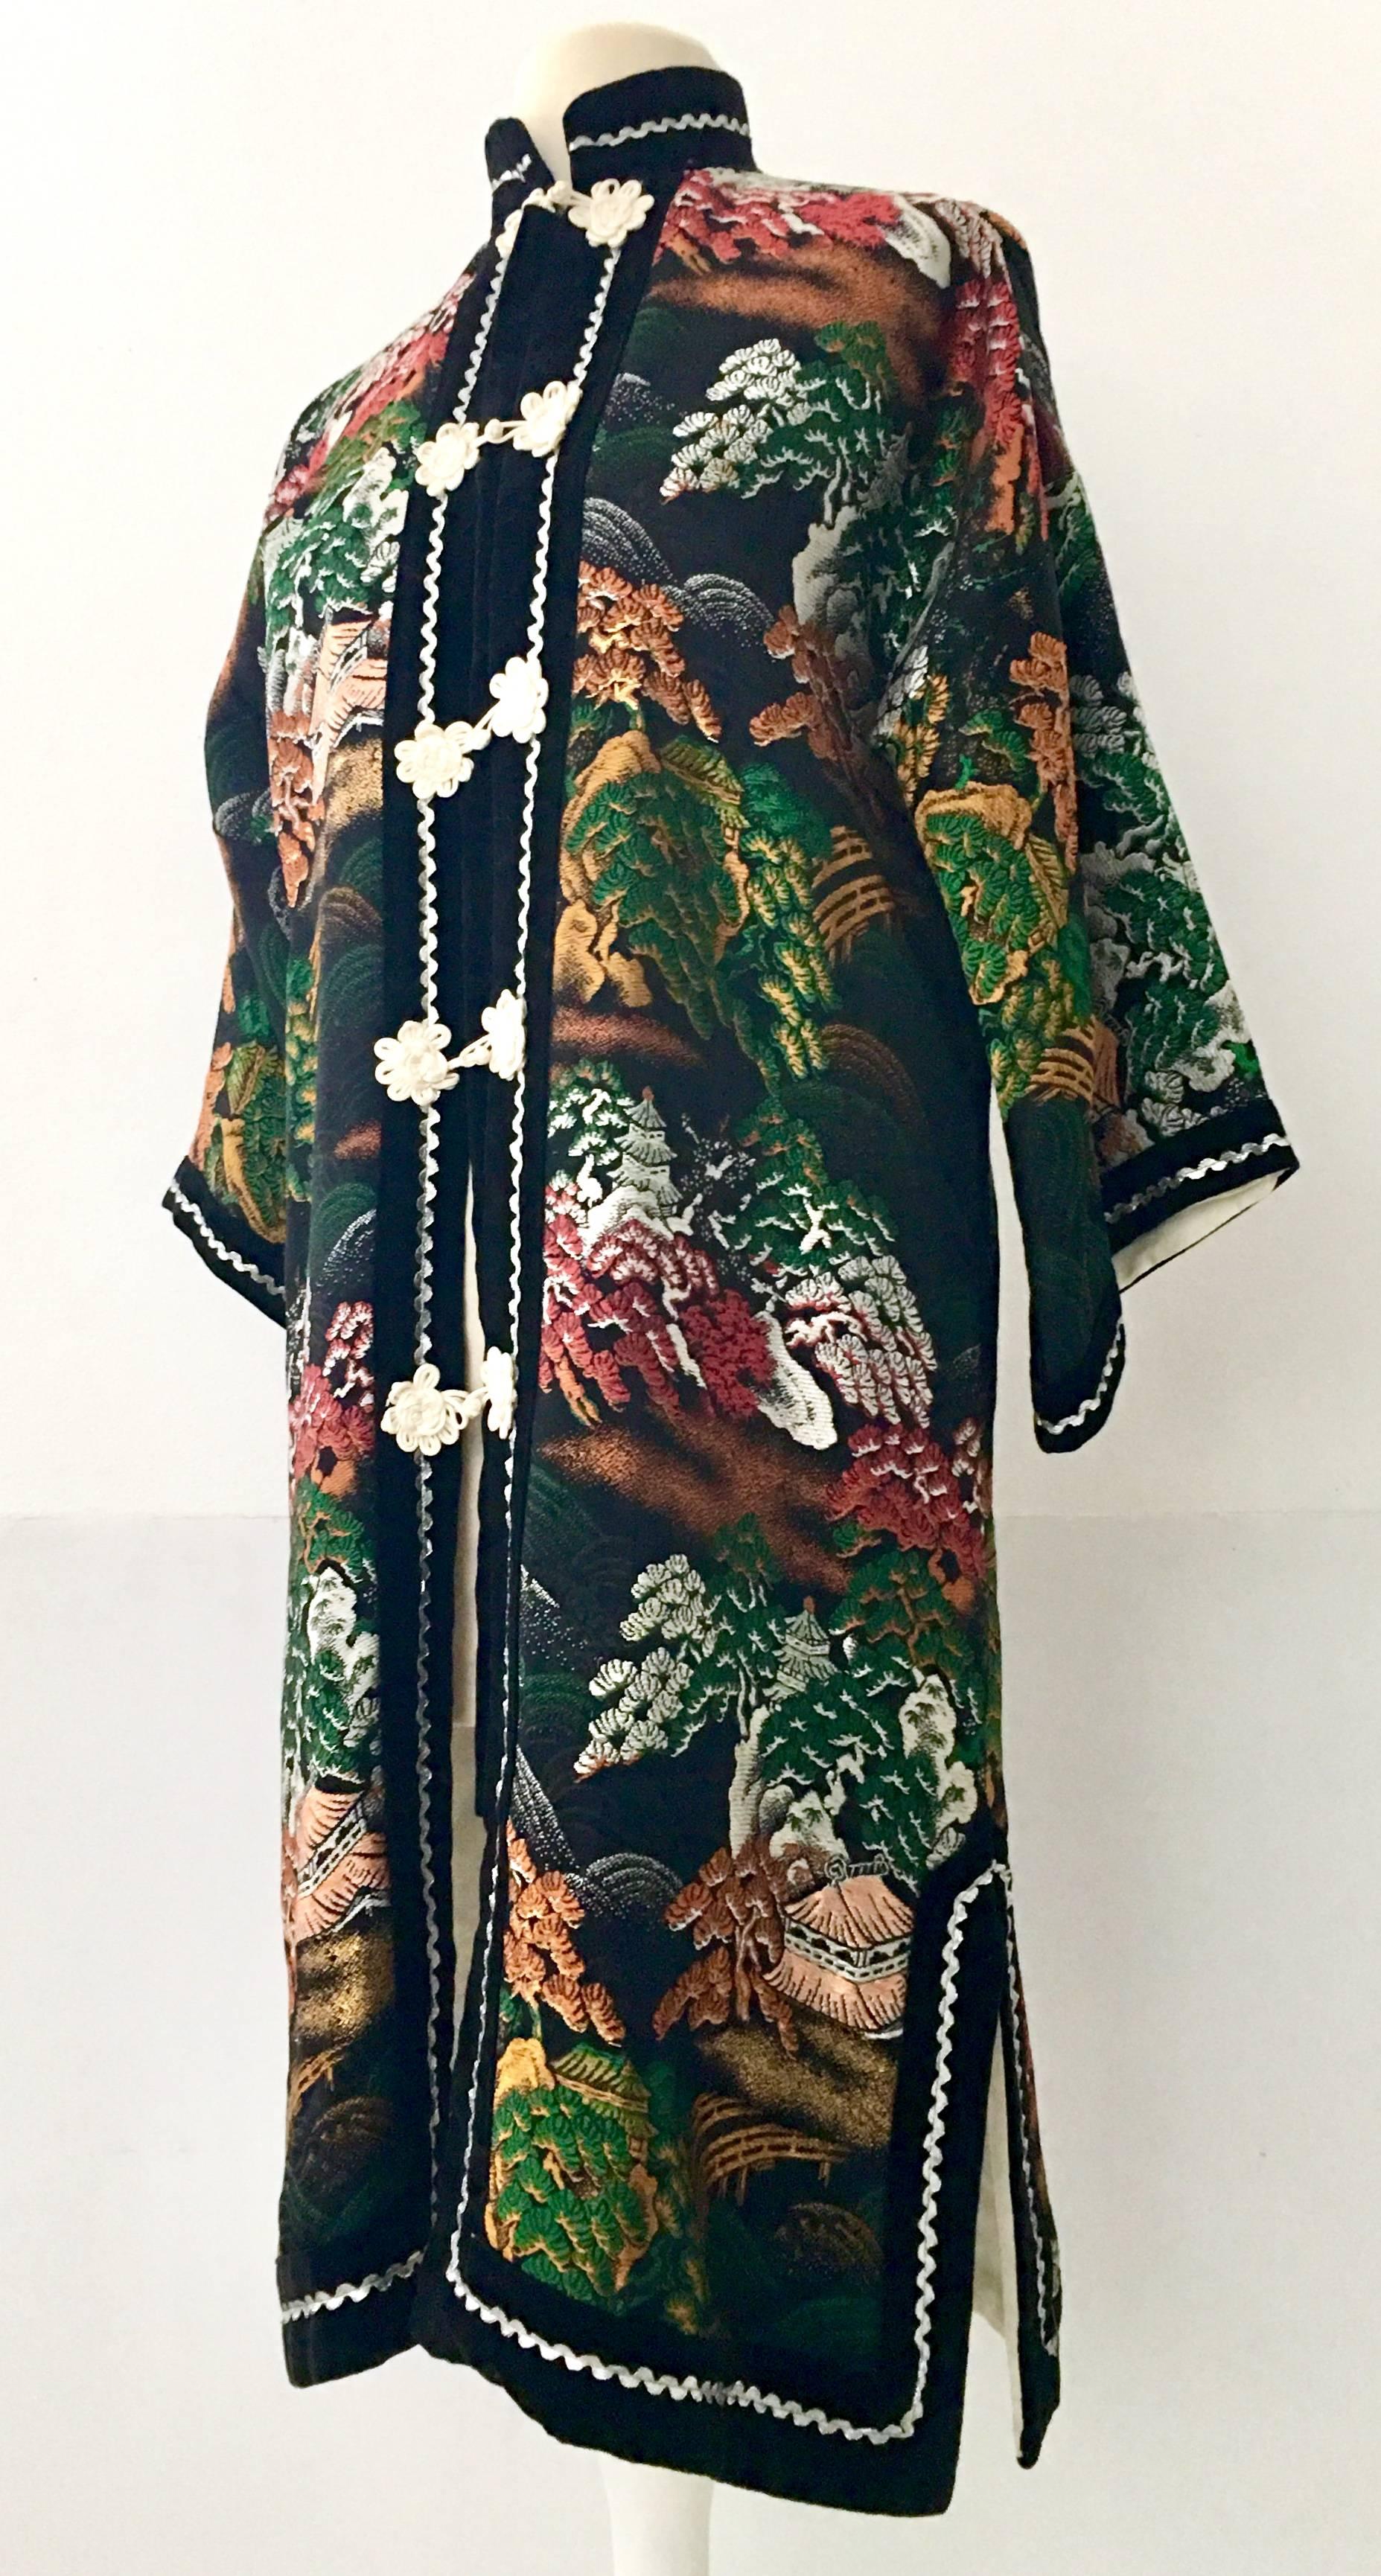 1970'S Silk Embroidered Kimono Style Hong Kong Jacket. This silk satin blend Hong Kong piece features a jet black ground with metallic thread embroidery in orange, emerald, peach, gold and white depicting a Bonsai , rolling hill and tree landscape